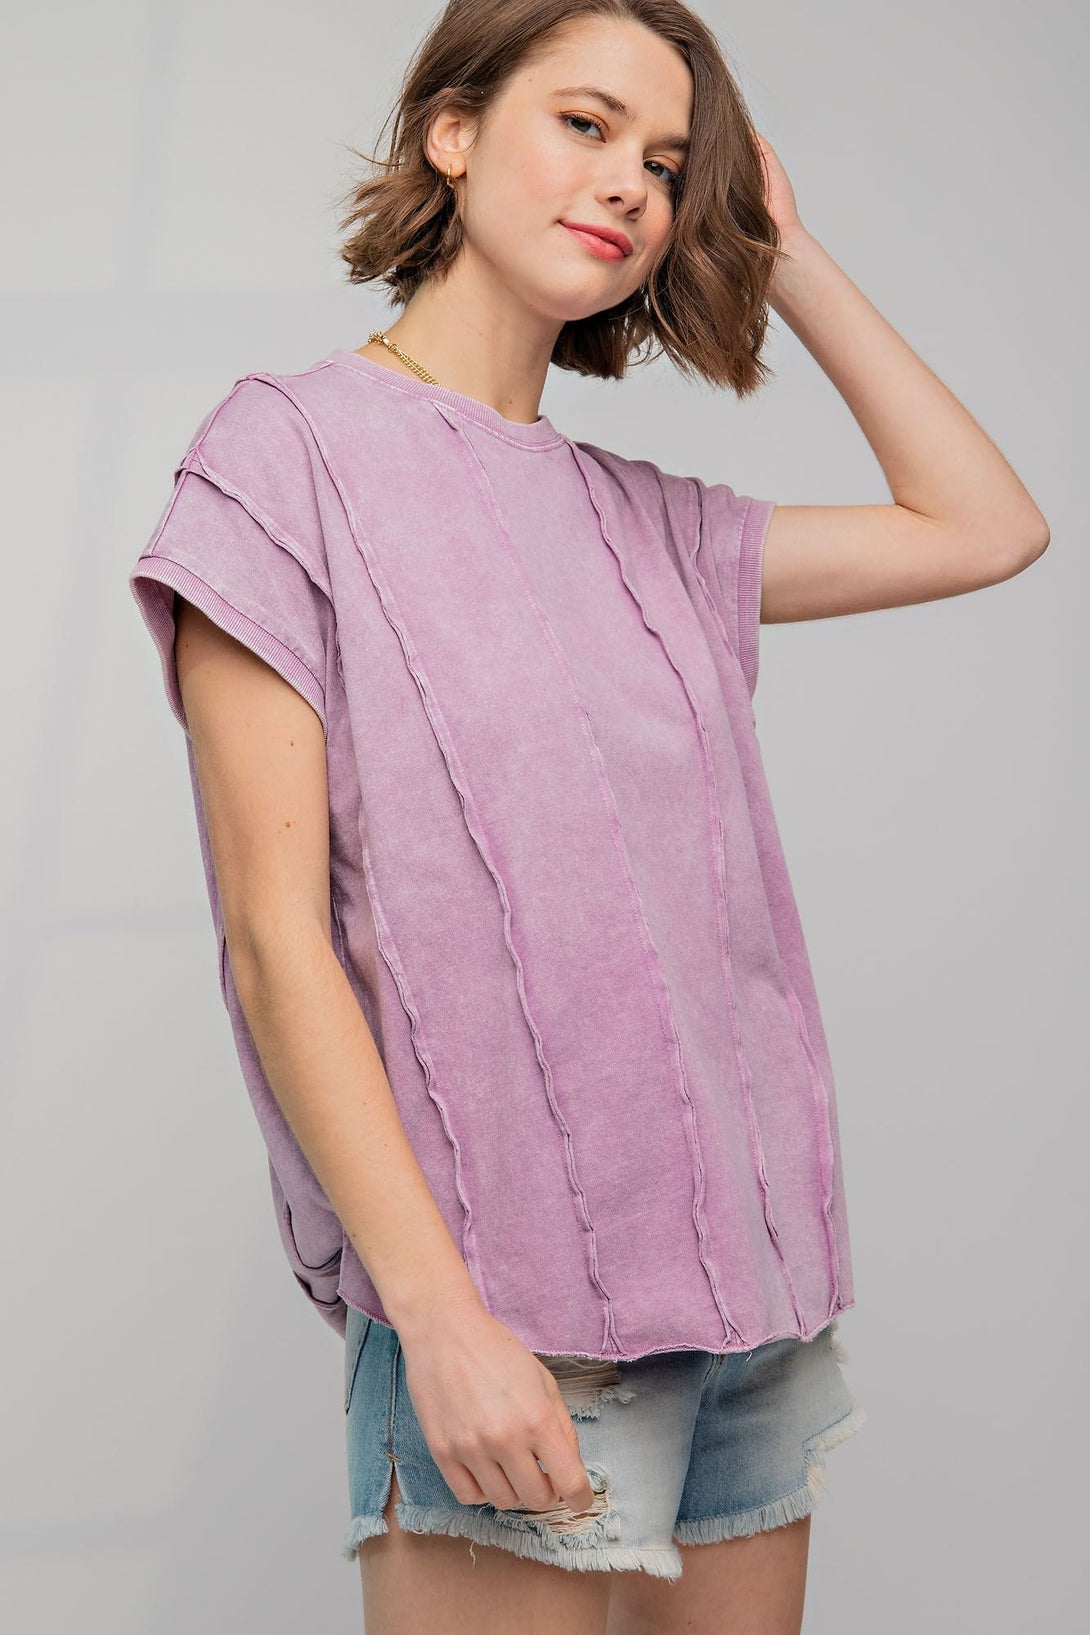 Easel Mineral Washed Boxy Short Sleeve Top